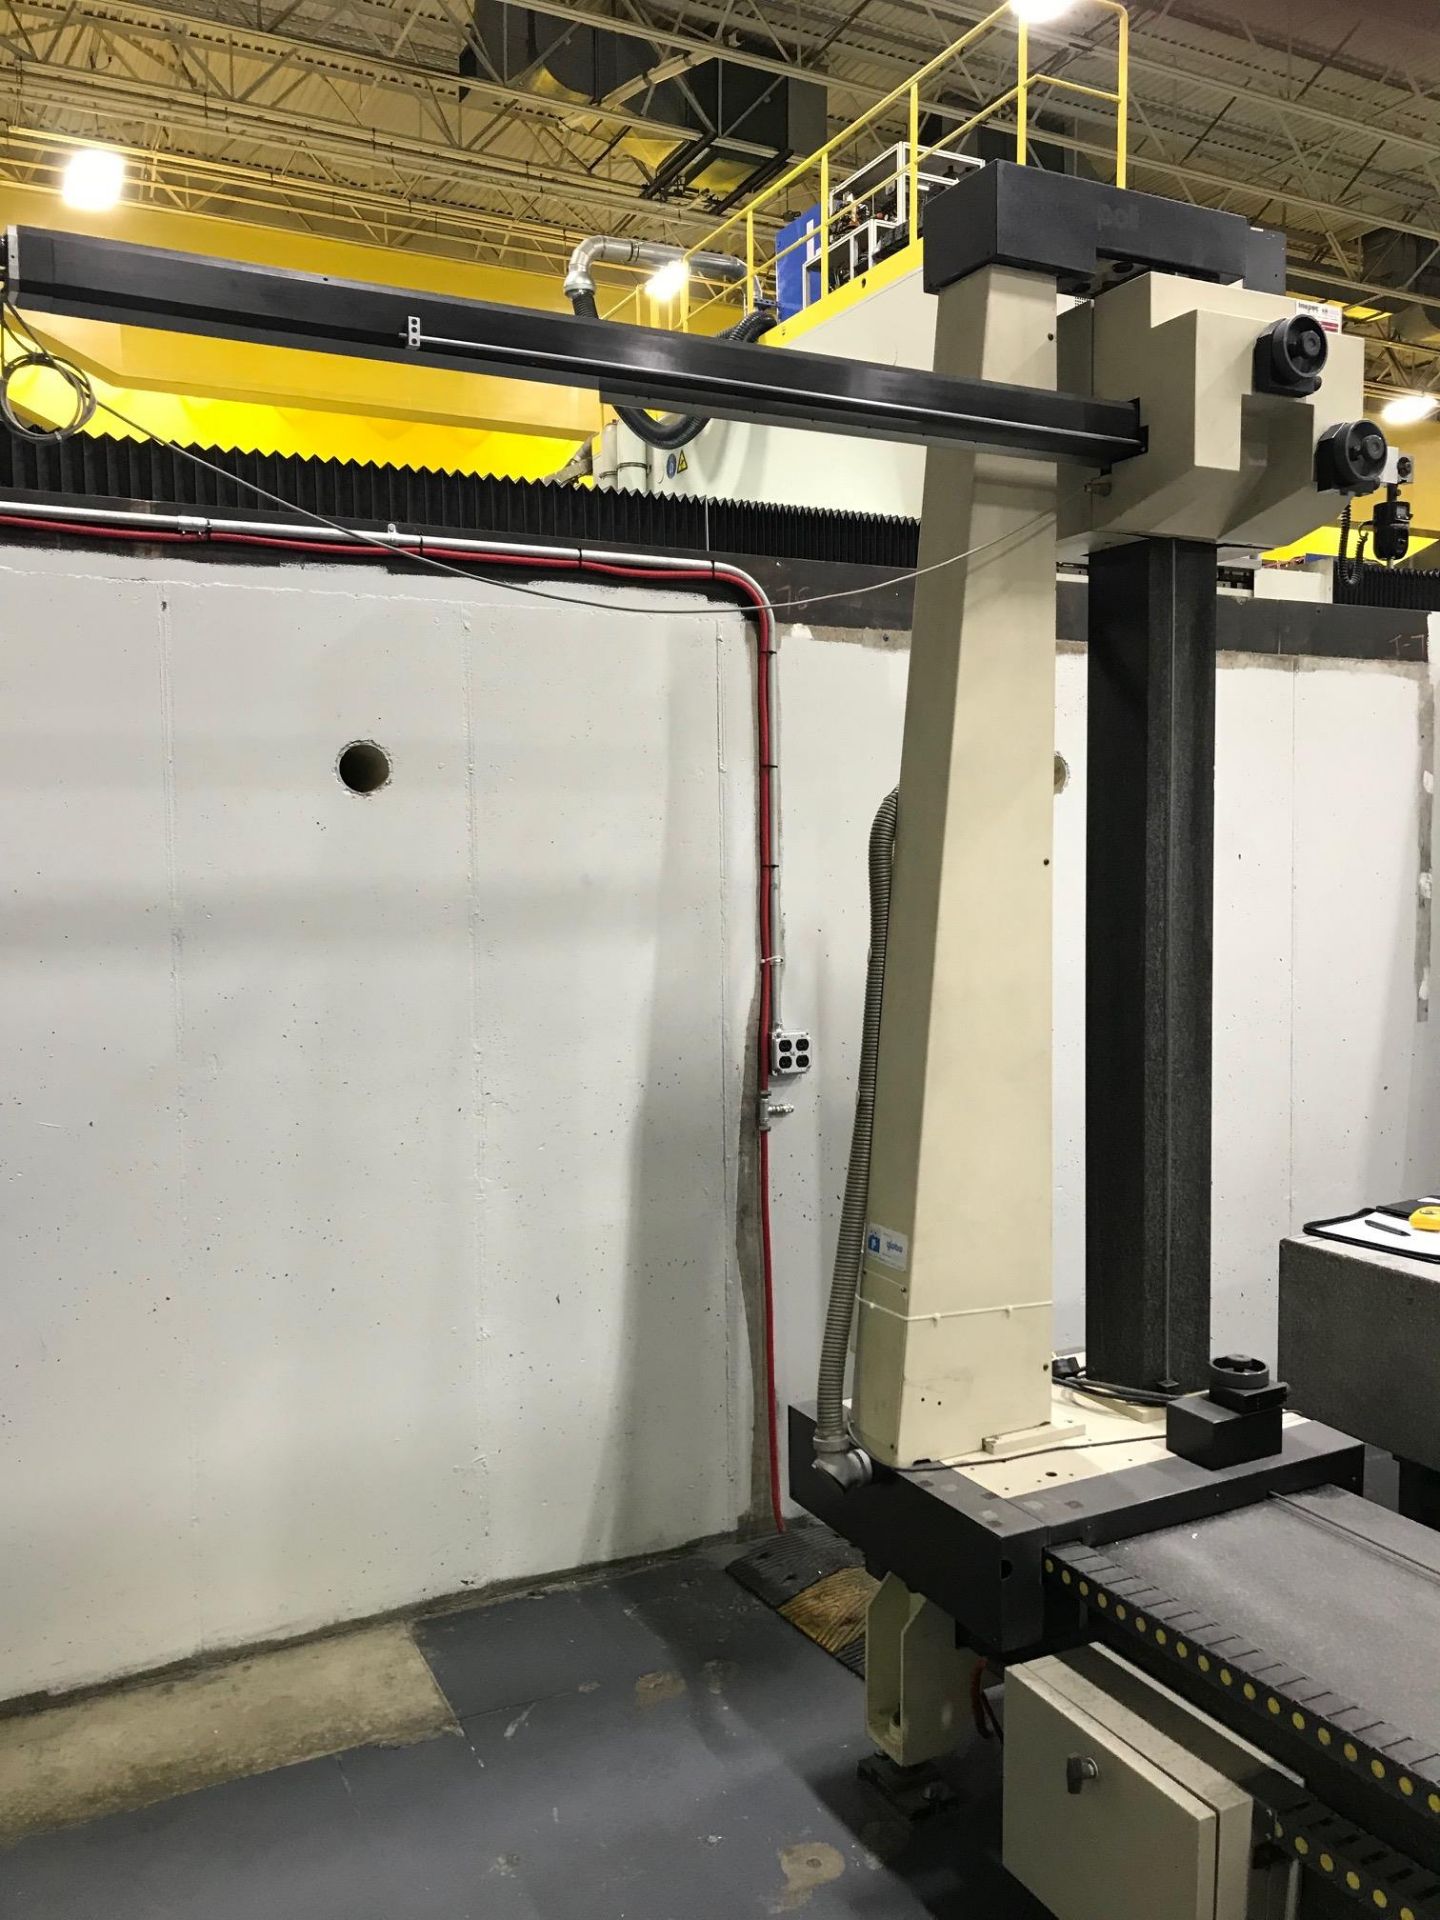 Poli Globo Coordinate Measuring Machine with 96" x 48" Granite Surface Plate, CMM Manager Software